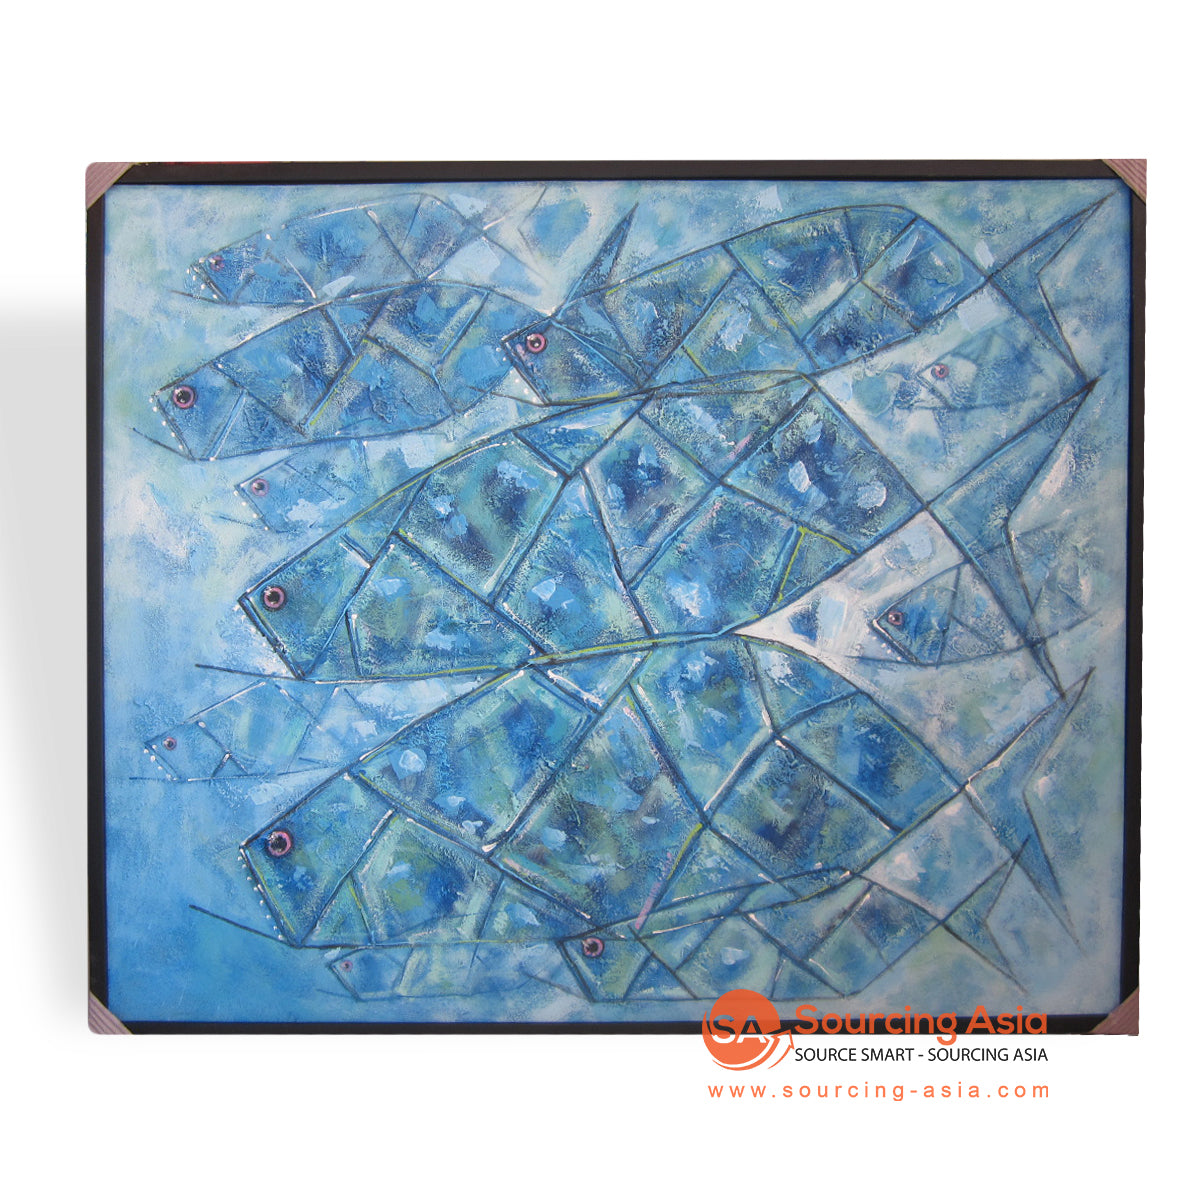 KRS499 ABSTRACT BLUE FISHES PAINTING